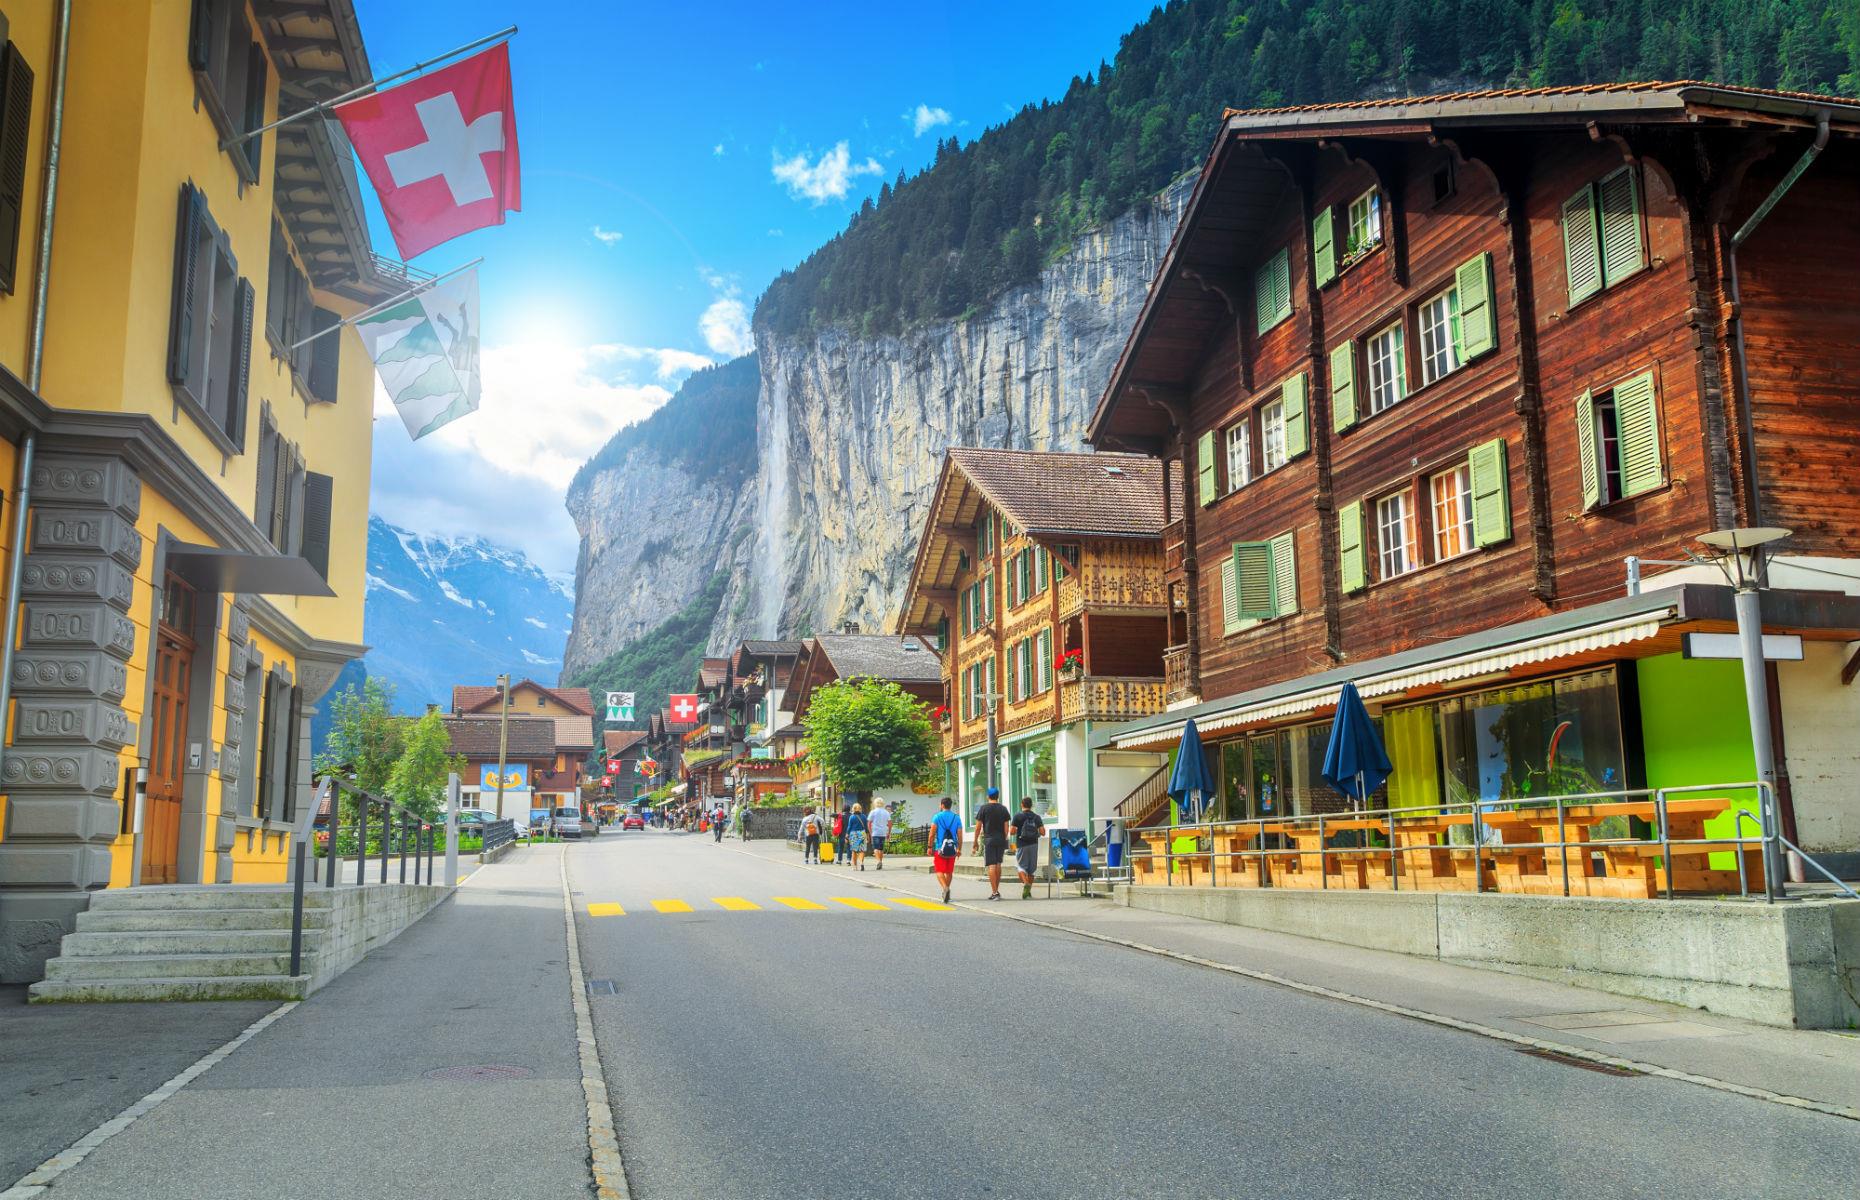 2nd most expensive country: Switzerland (112.2)